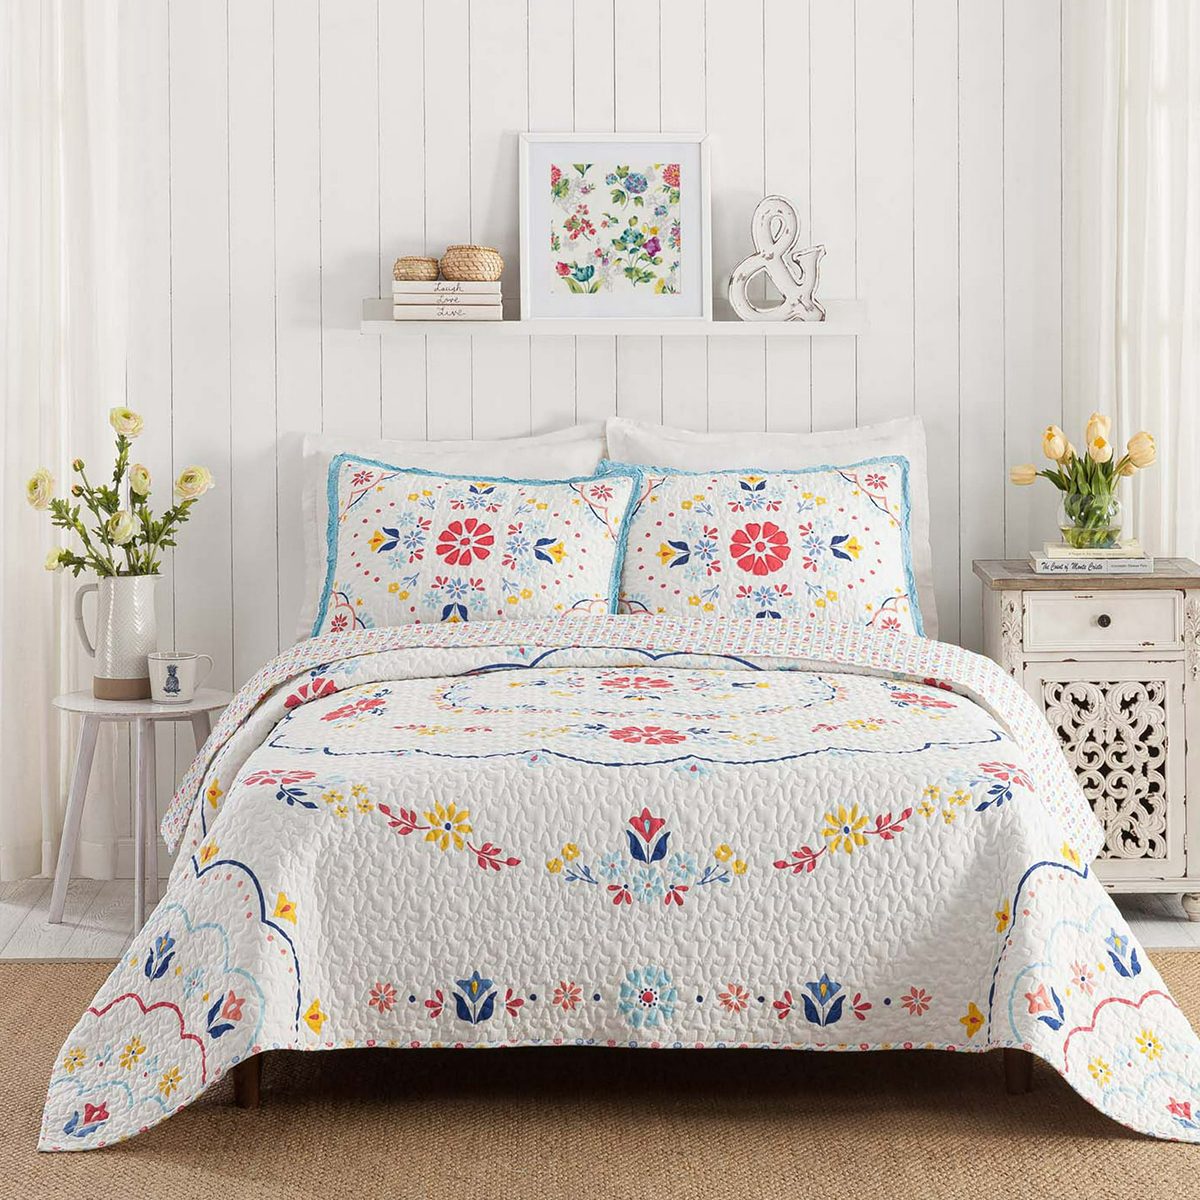 10 Pioneer Woman Bedding Options For A Country Chic Home